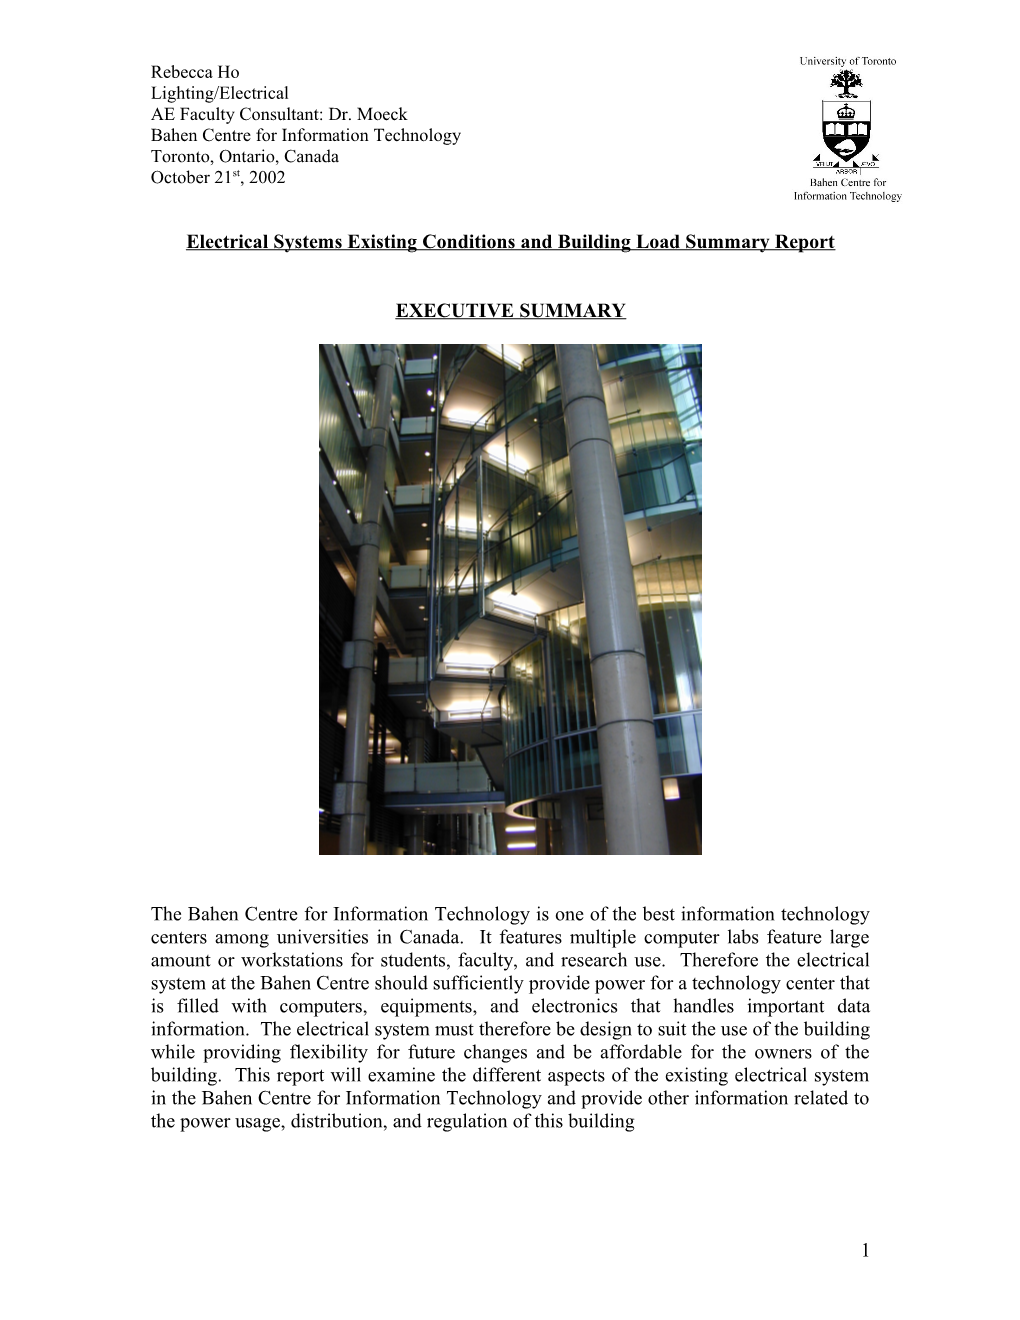 Electrical Systems Existing Conditions and Building Load Summary Report